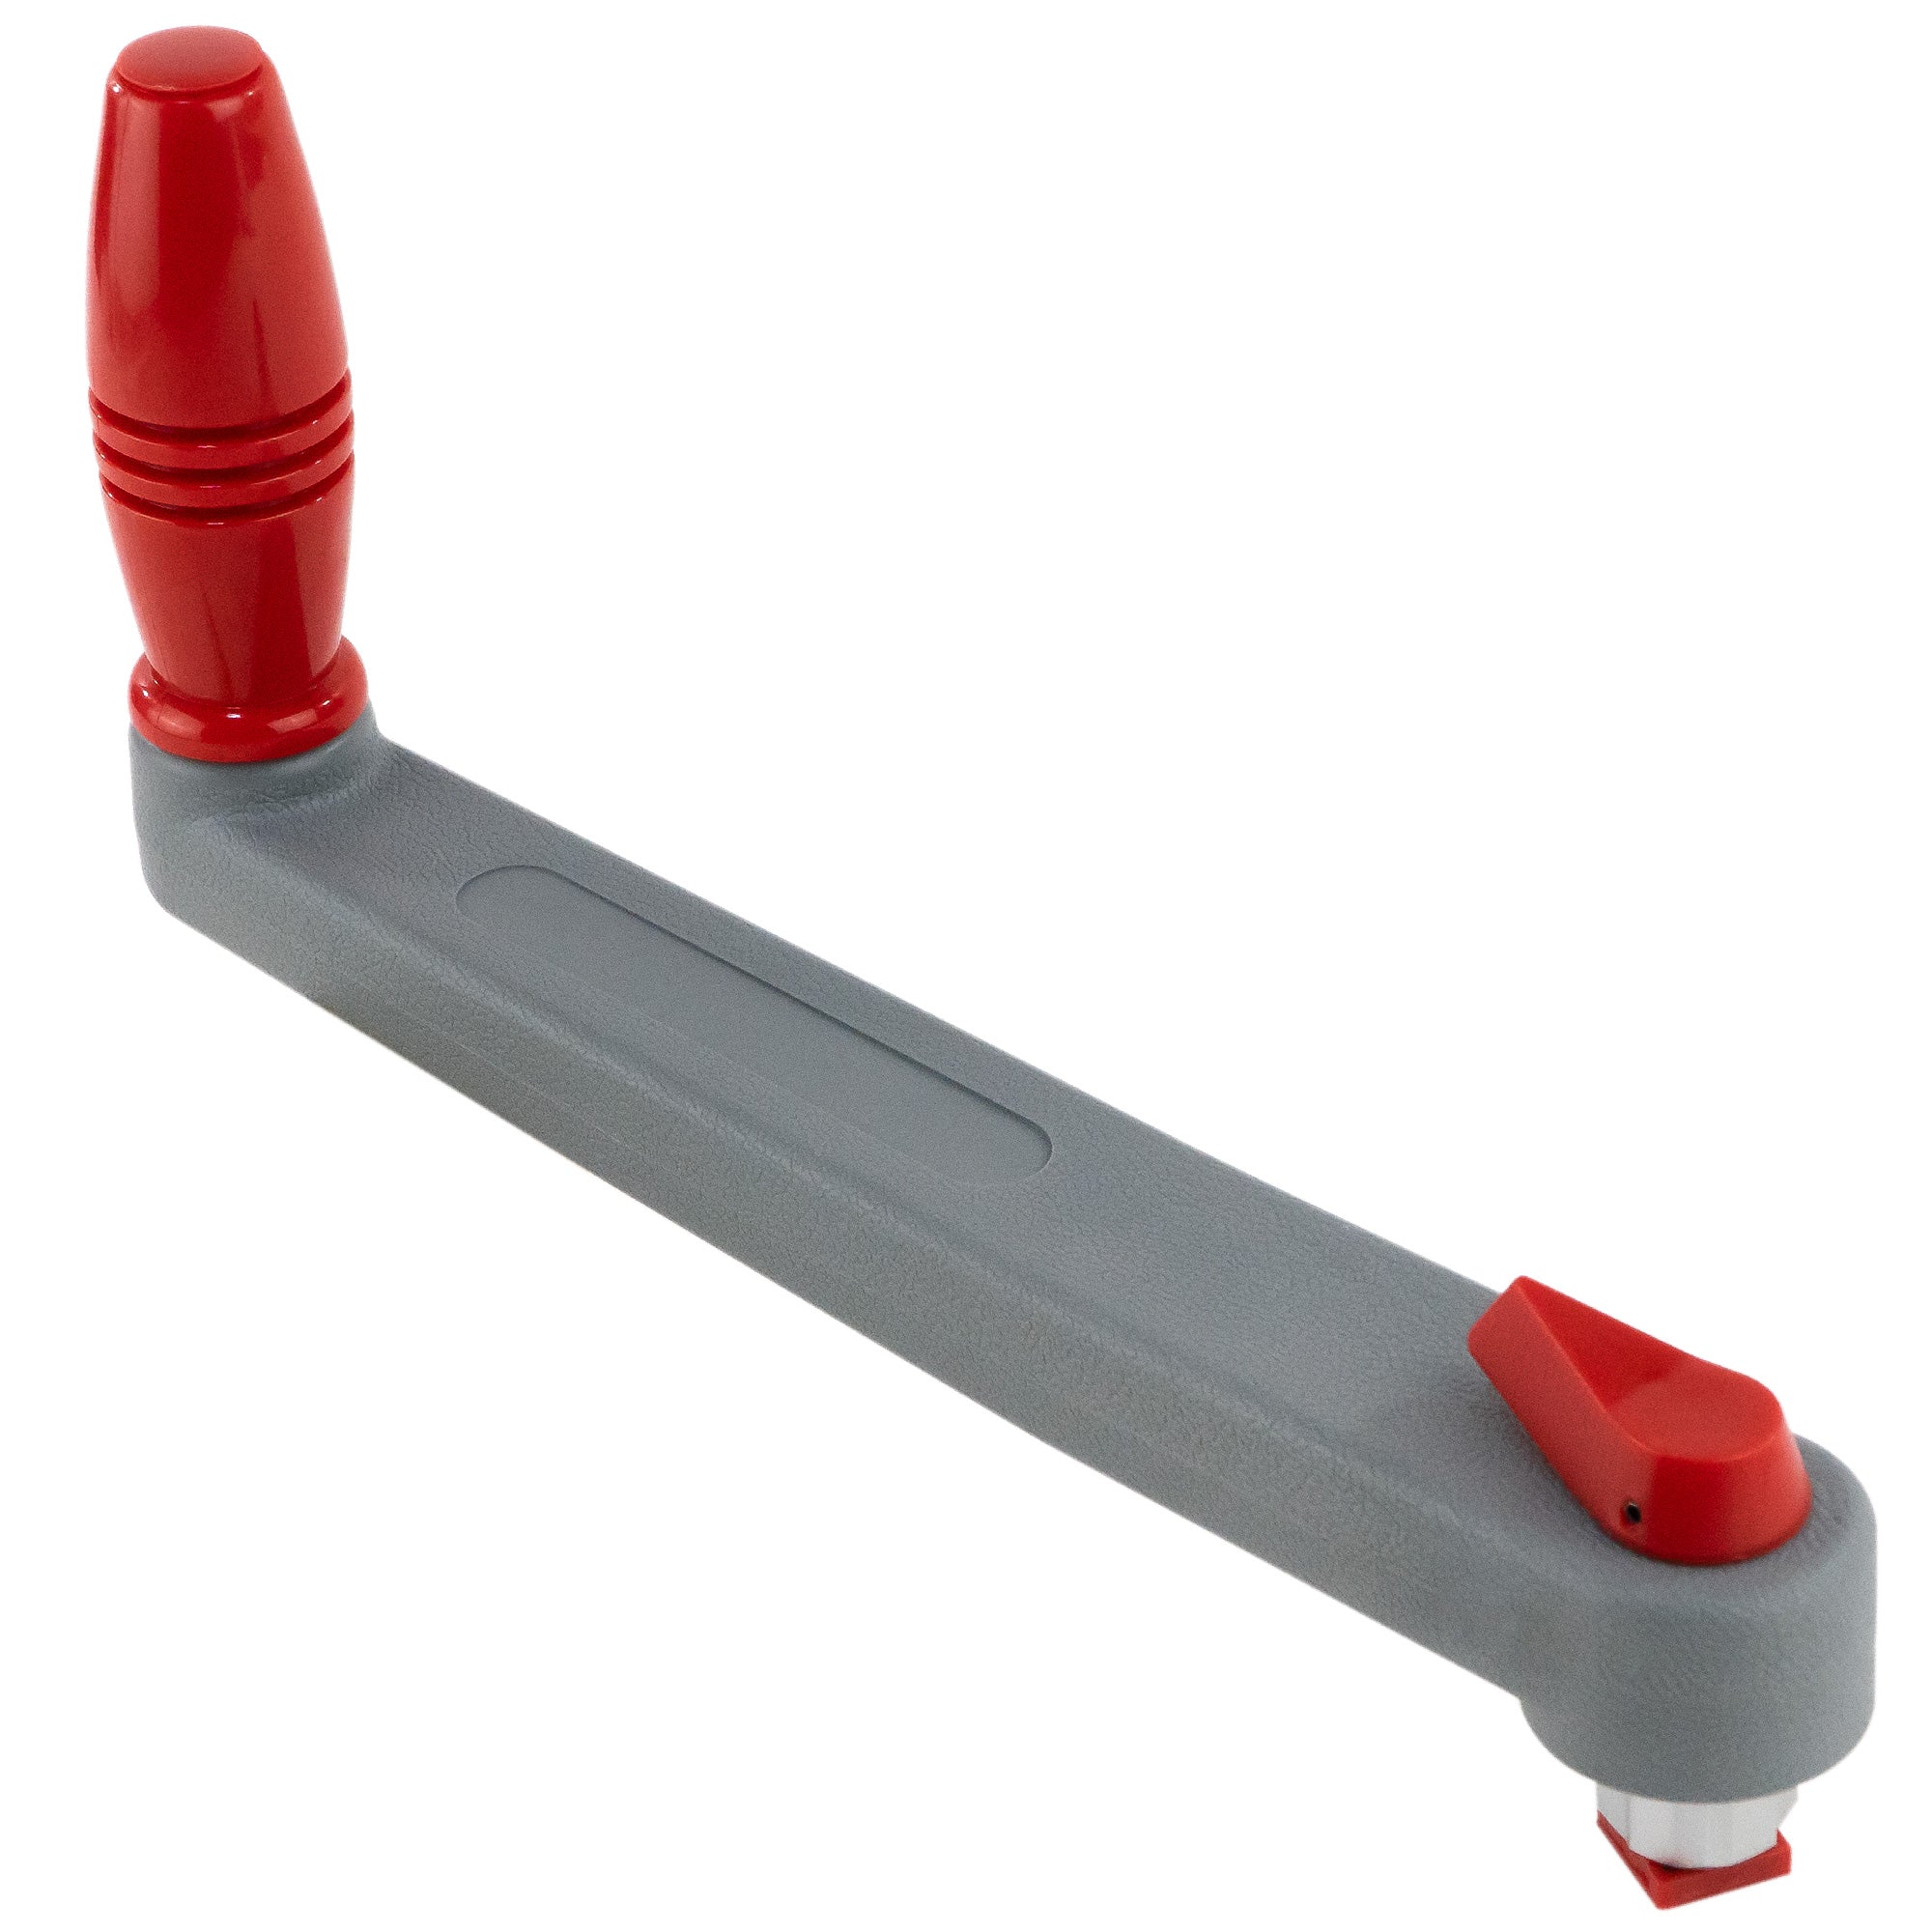 Universal Winch Handle, 10" Floating Lock-in Style, Grey/Red - FO3924